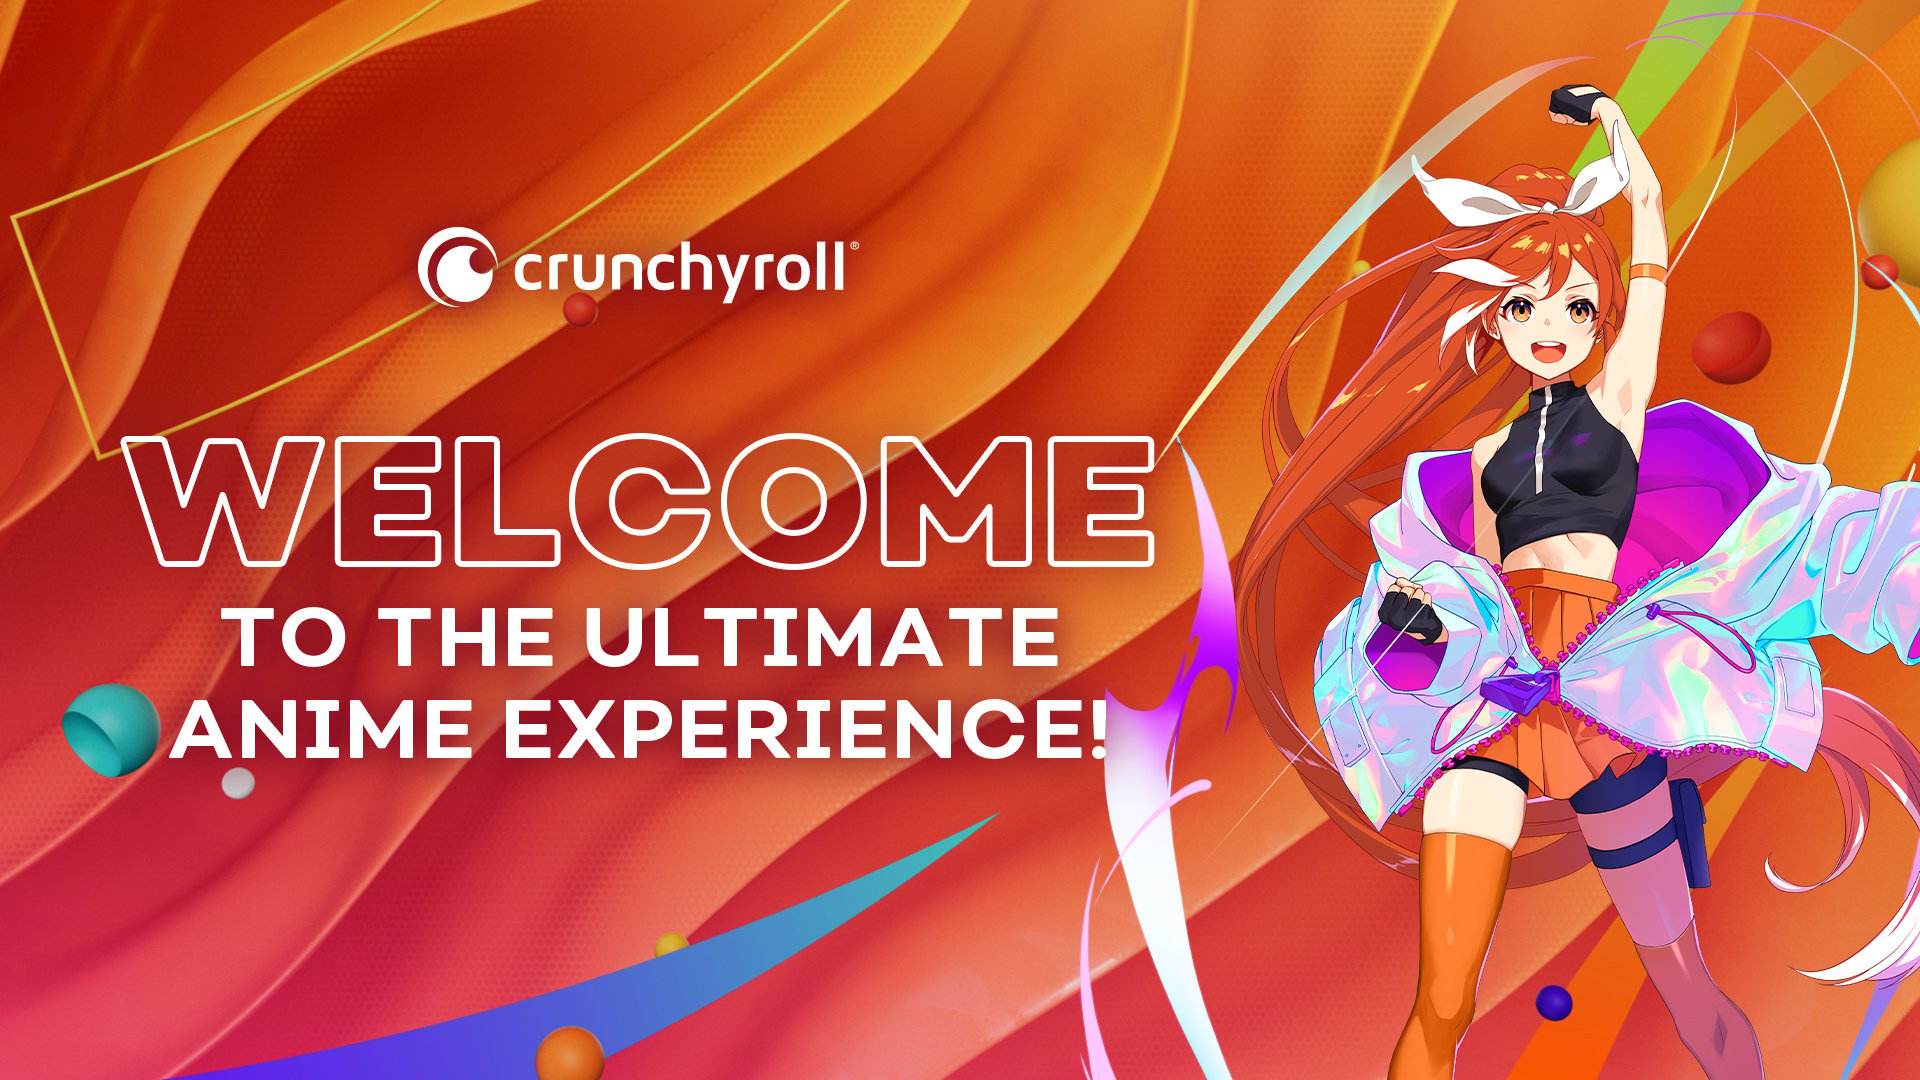 Artwork for Crunchyroll, which features Hime and says 'Welcome to the ultimate anime experience.'